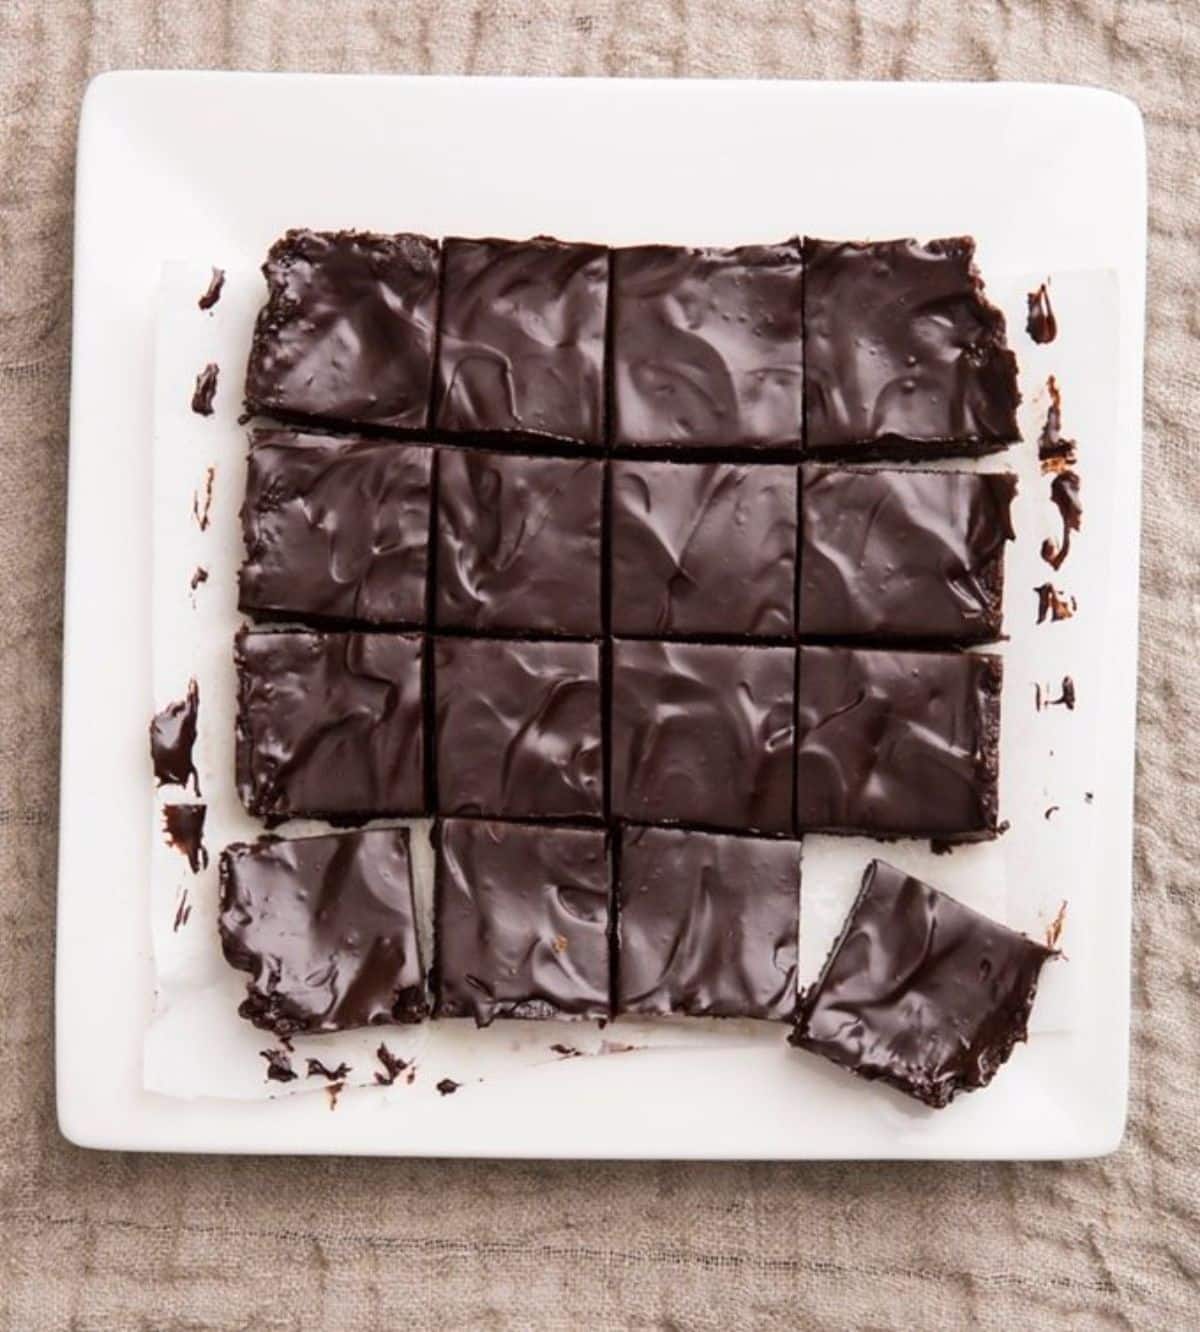 Tasty unbaked brownies on a white plate.